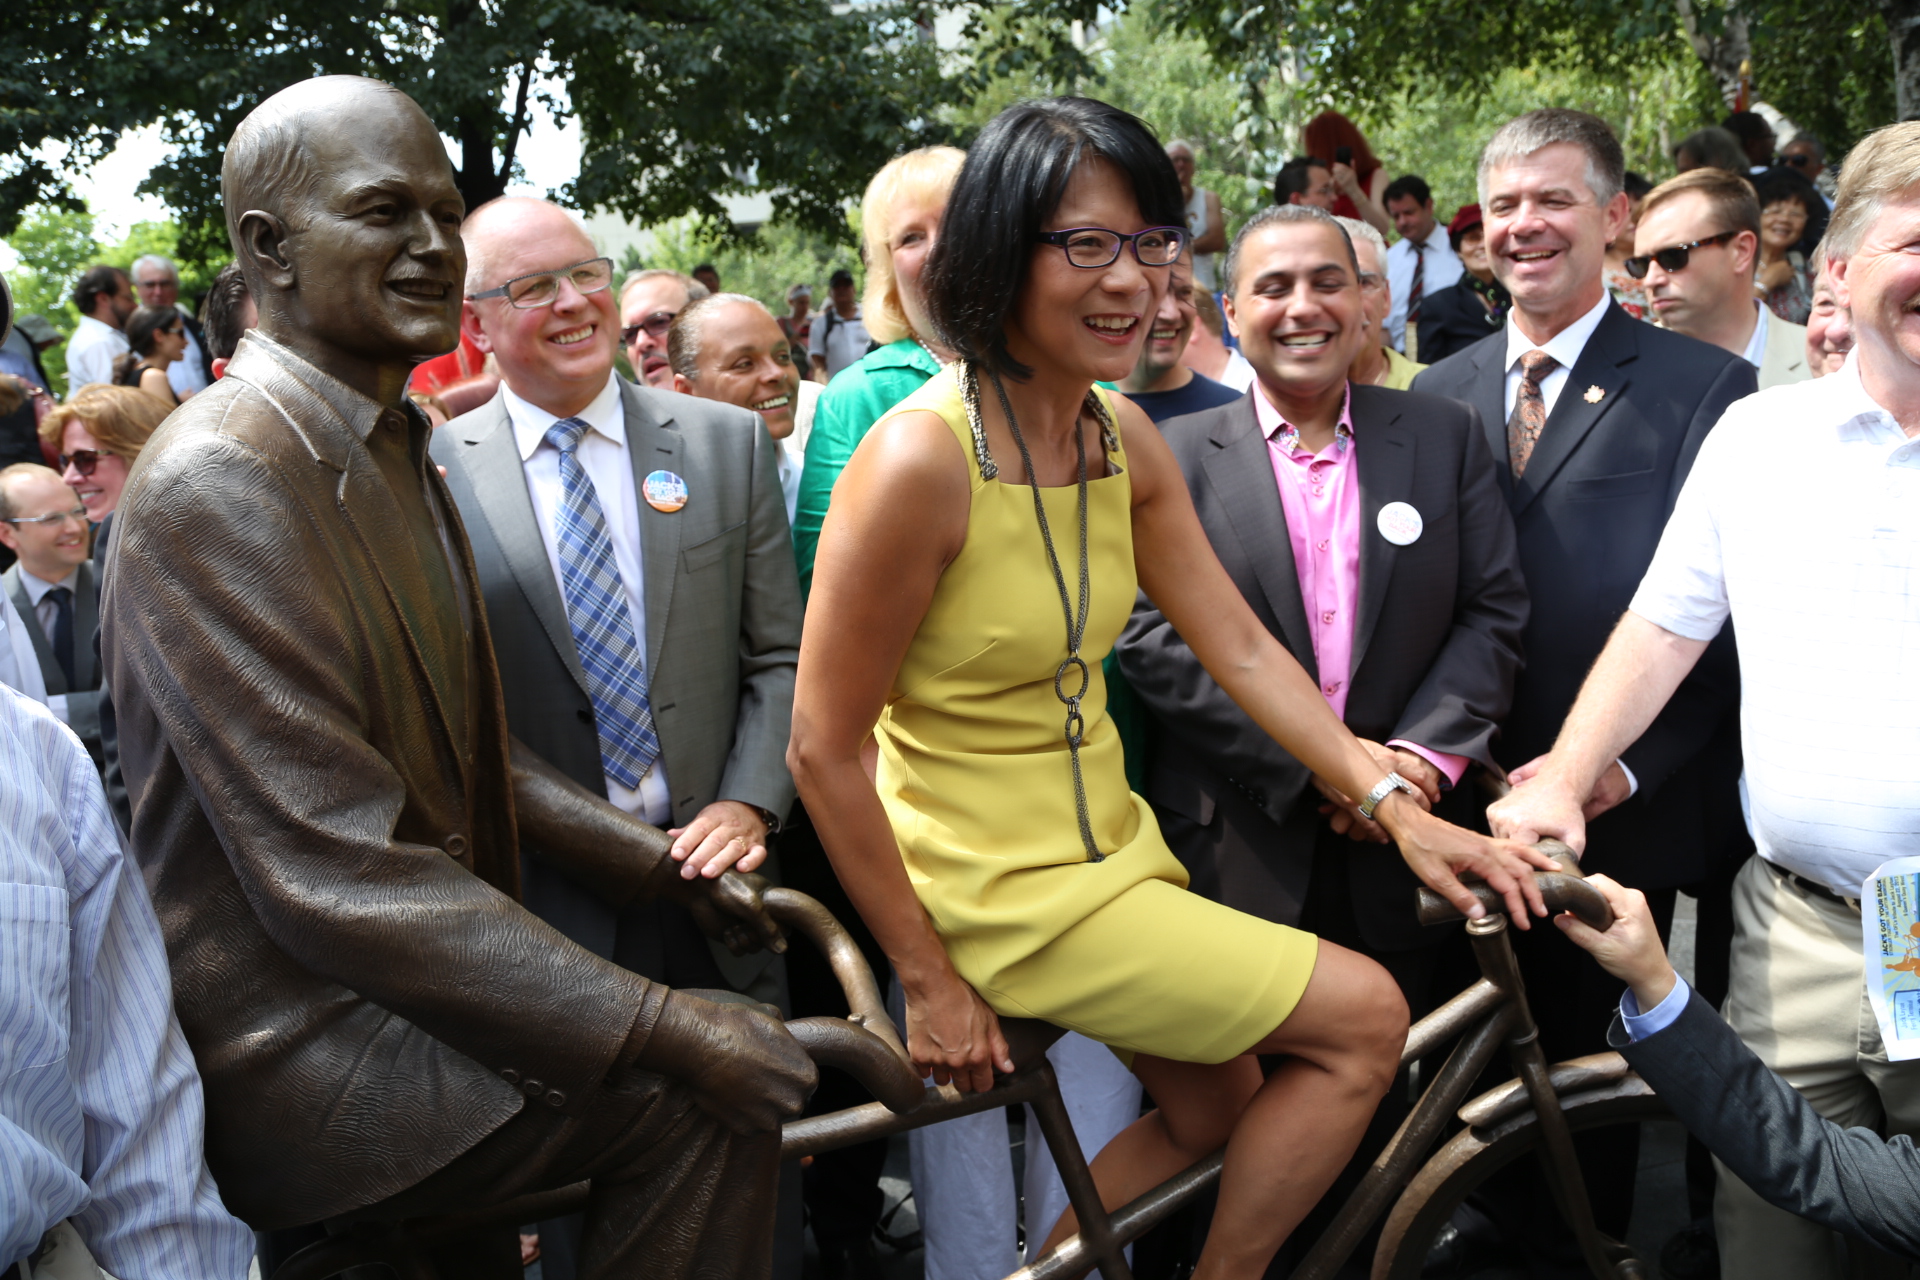 The unveiling of the Jack Layton statue with his widow, MP Olivia Chow